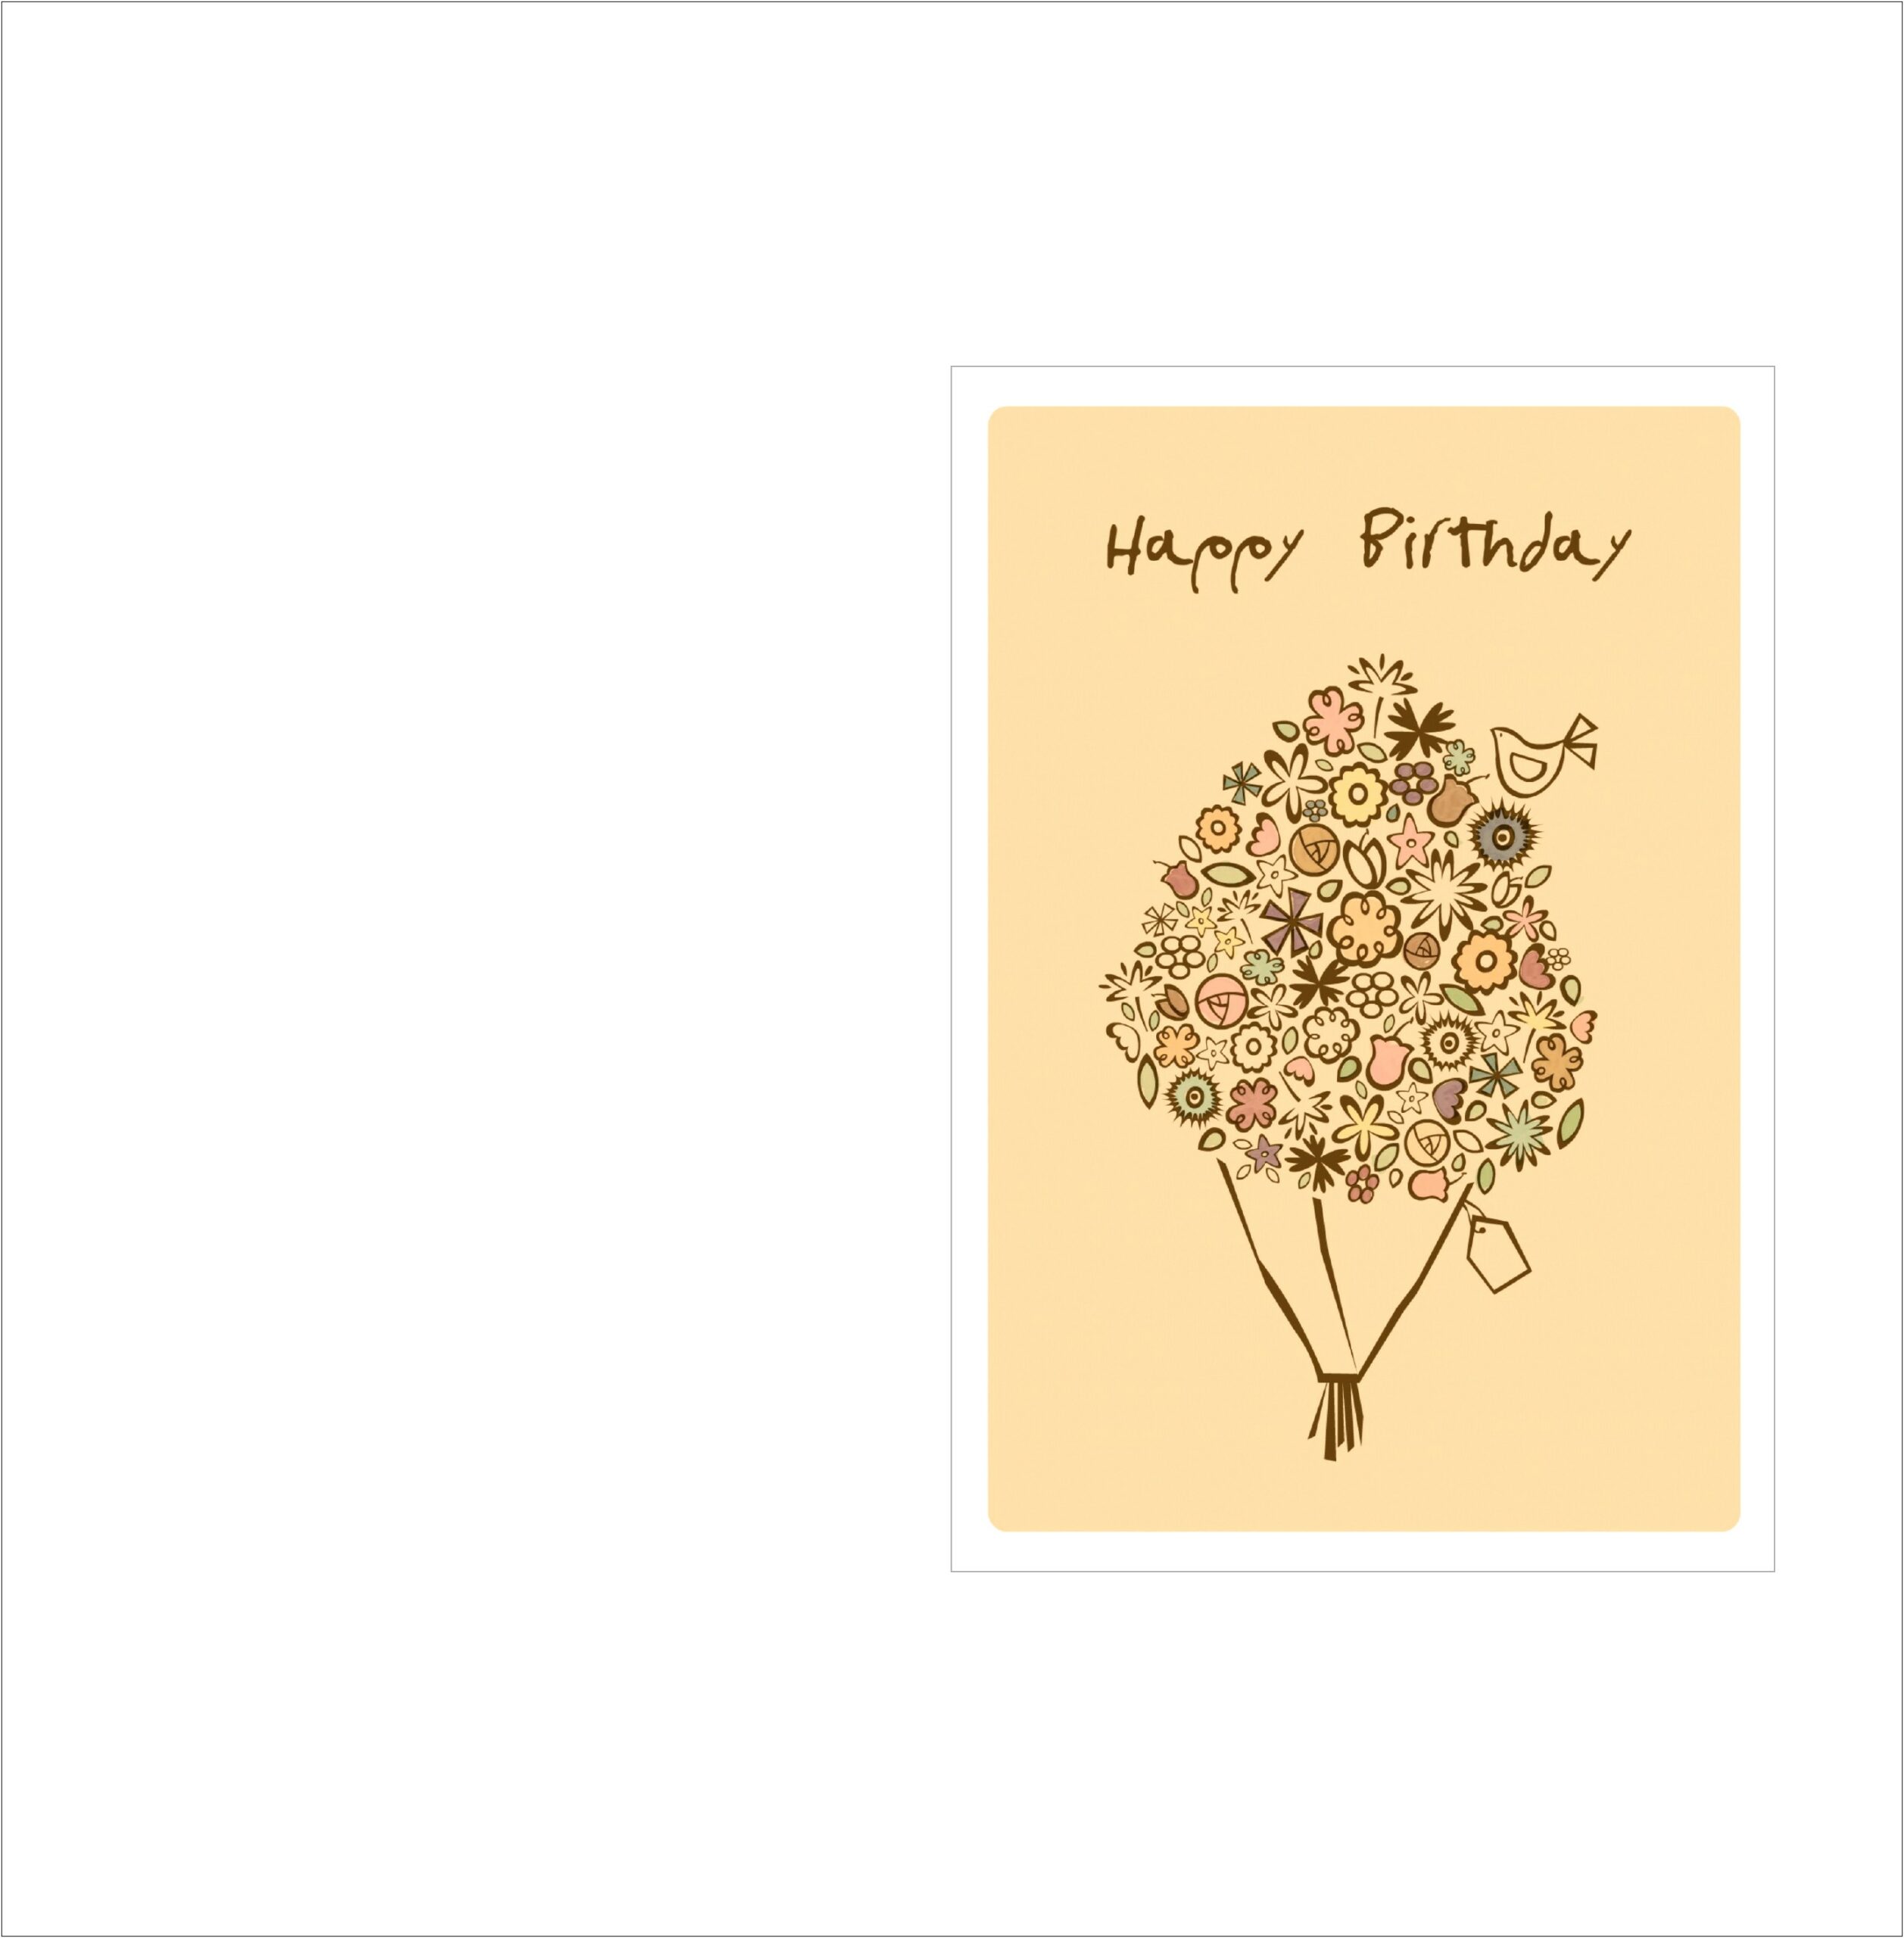 Birthday Card Templates For Free Download